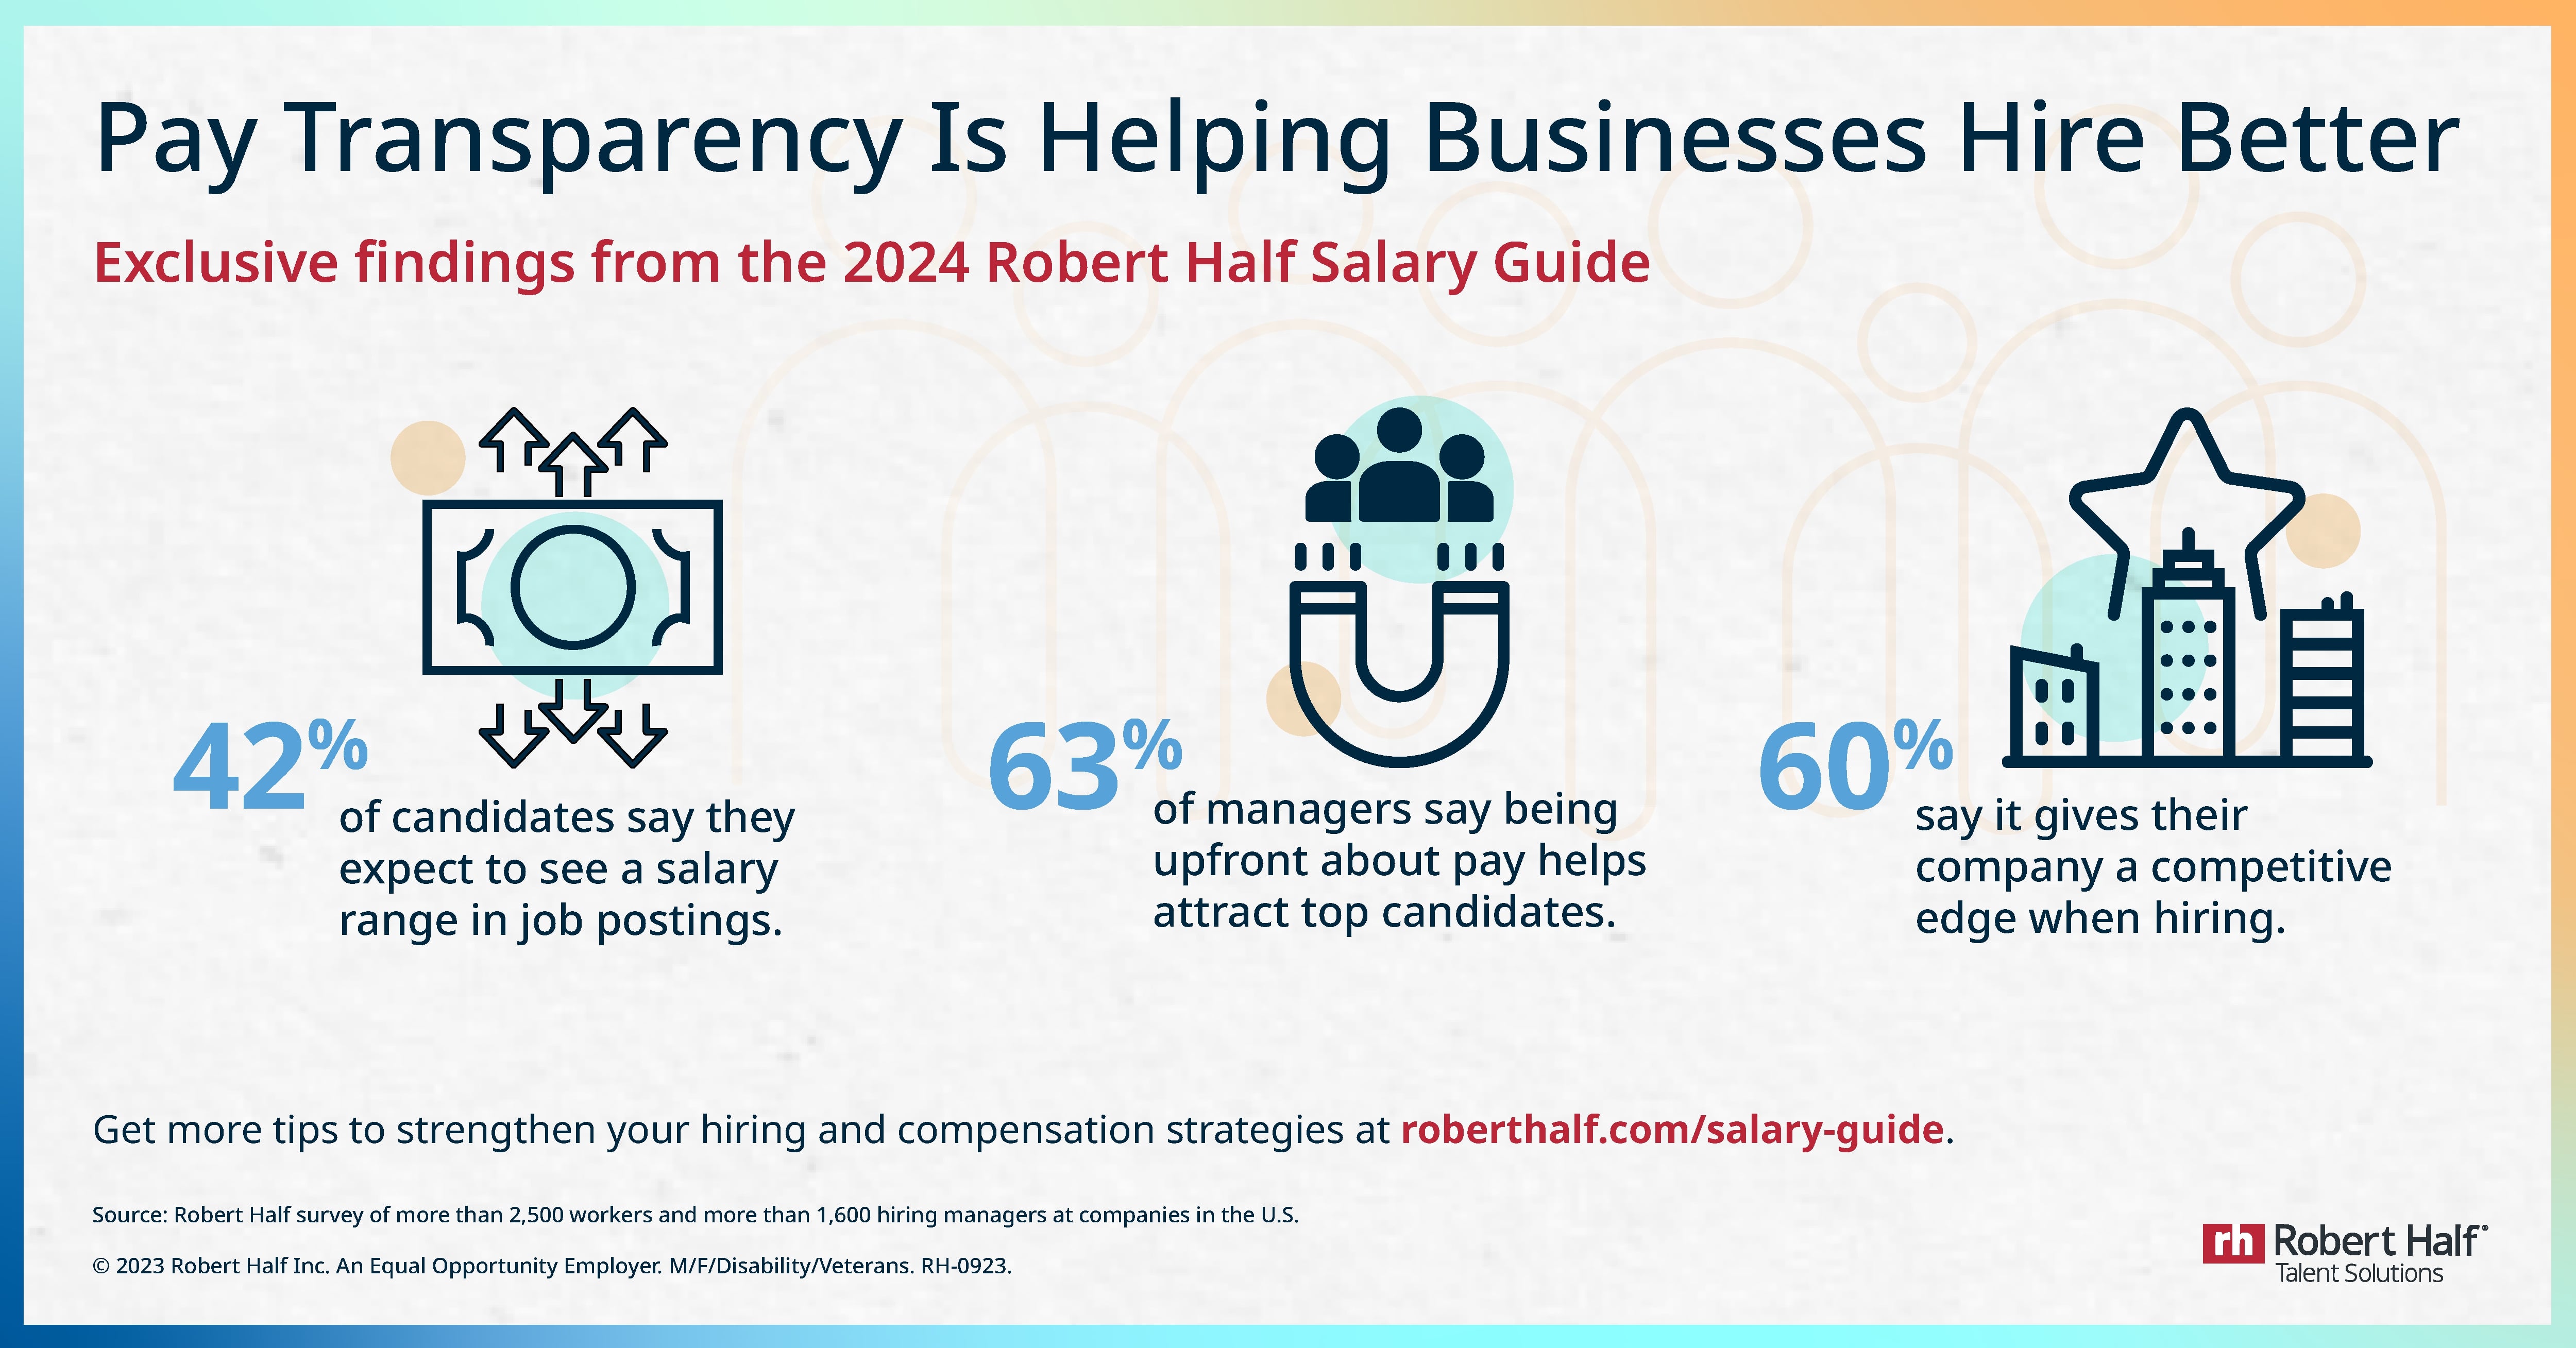 Pay transparency is helping businesses hire better